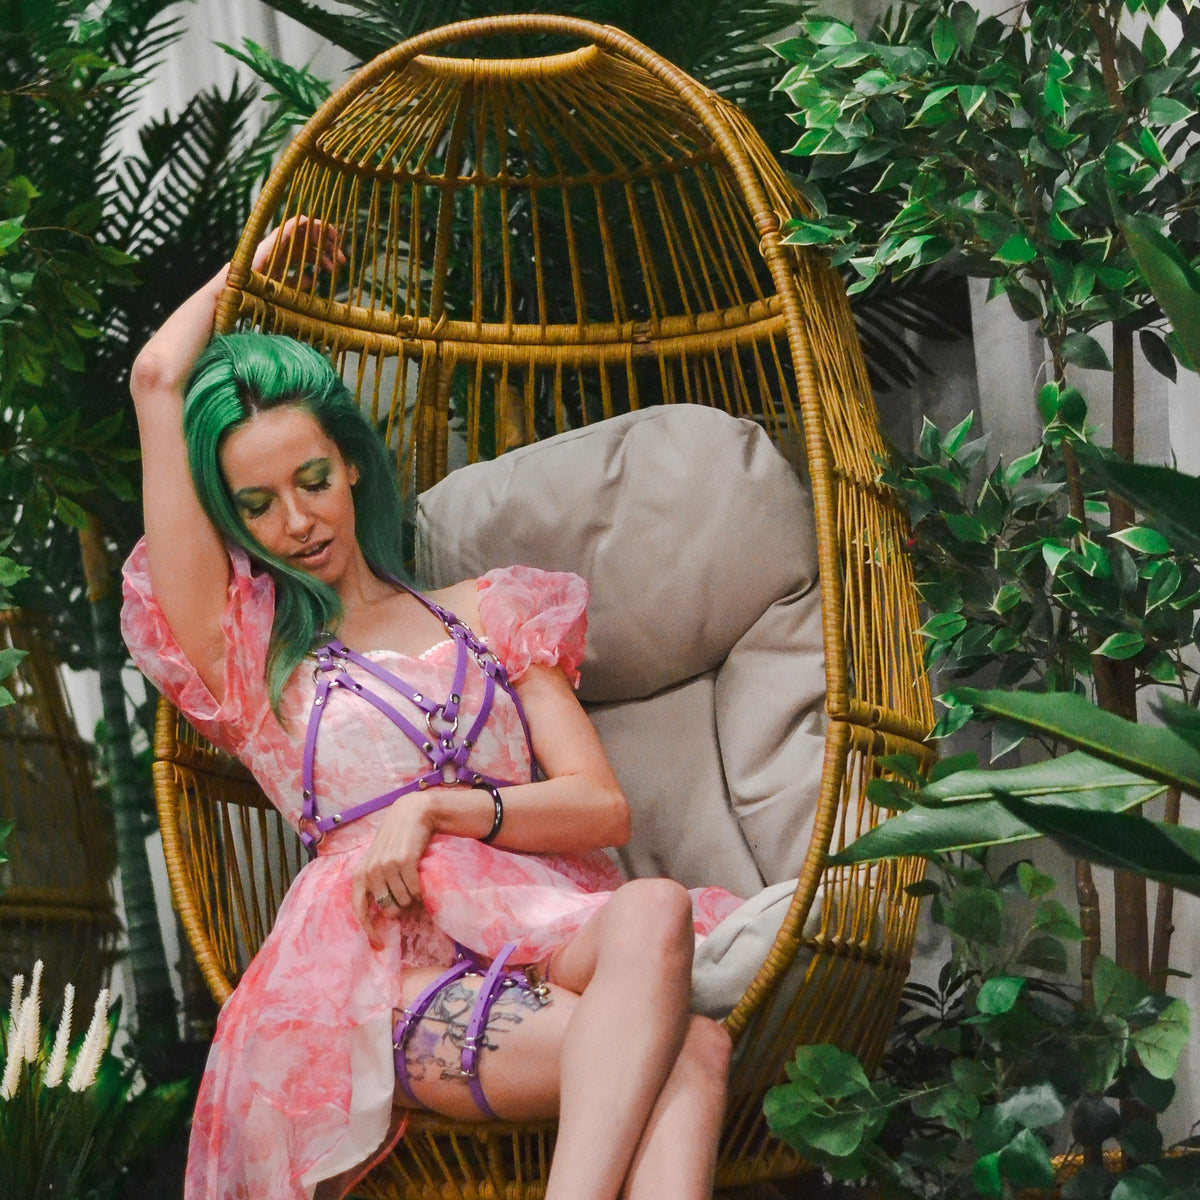 Woman styled on a classic egg chair with a purple reversible lust chest harness and pink dress.